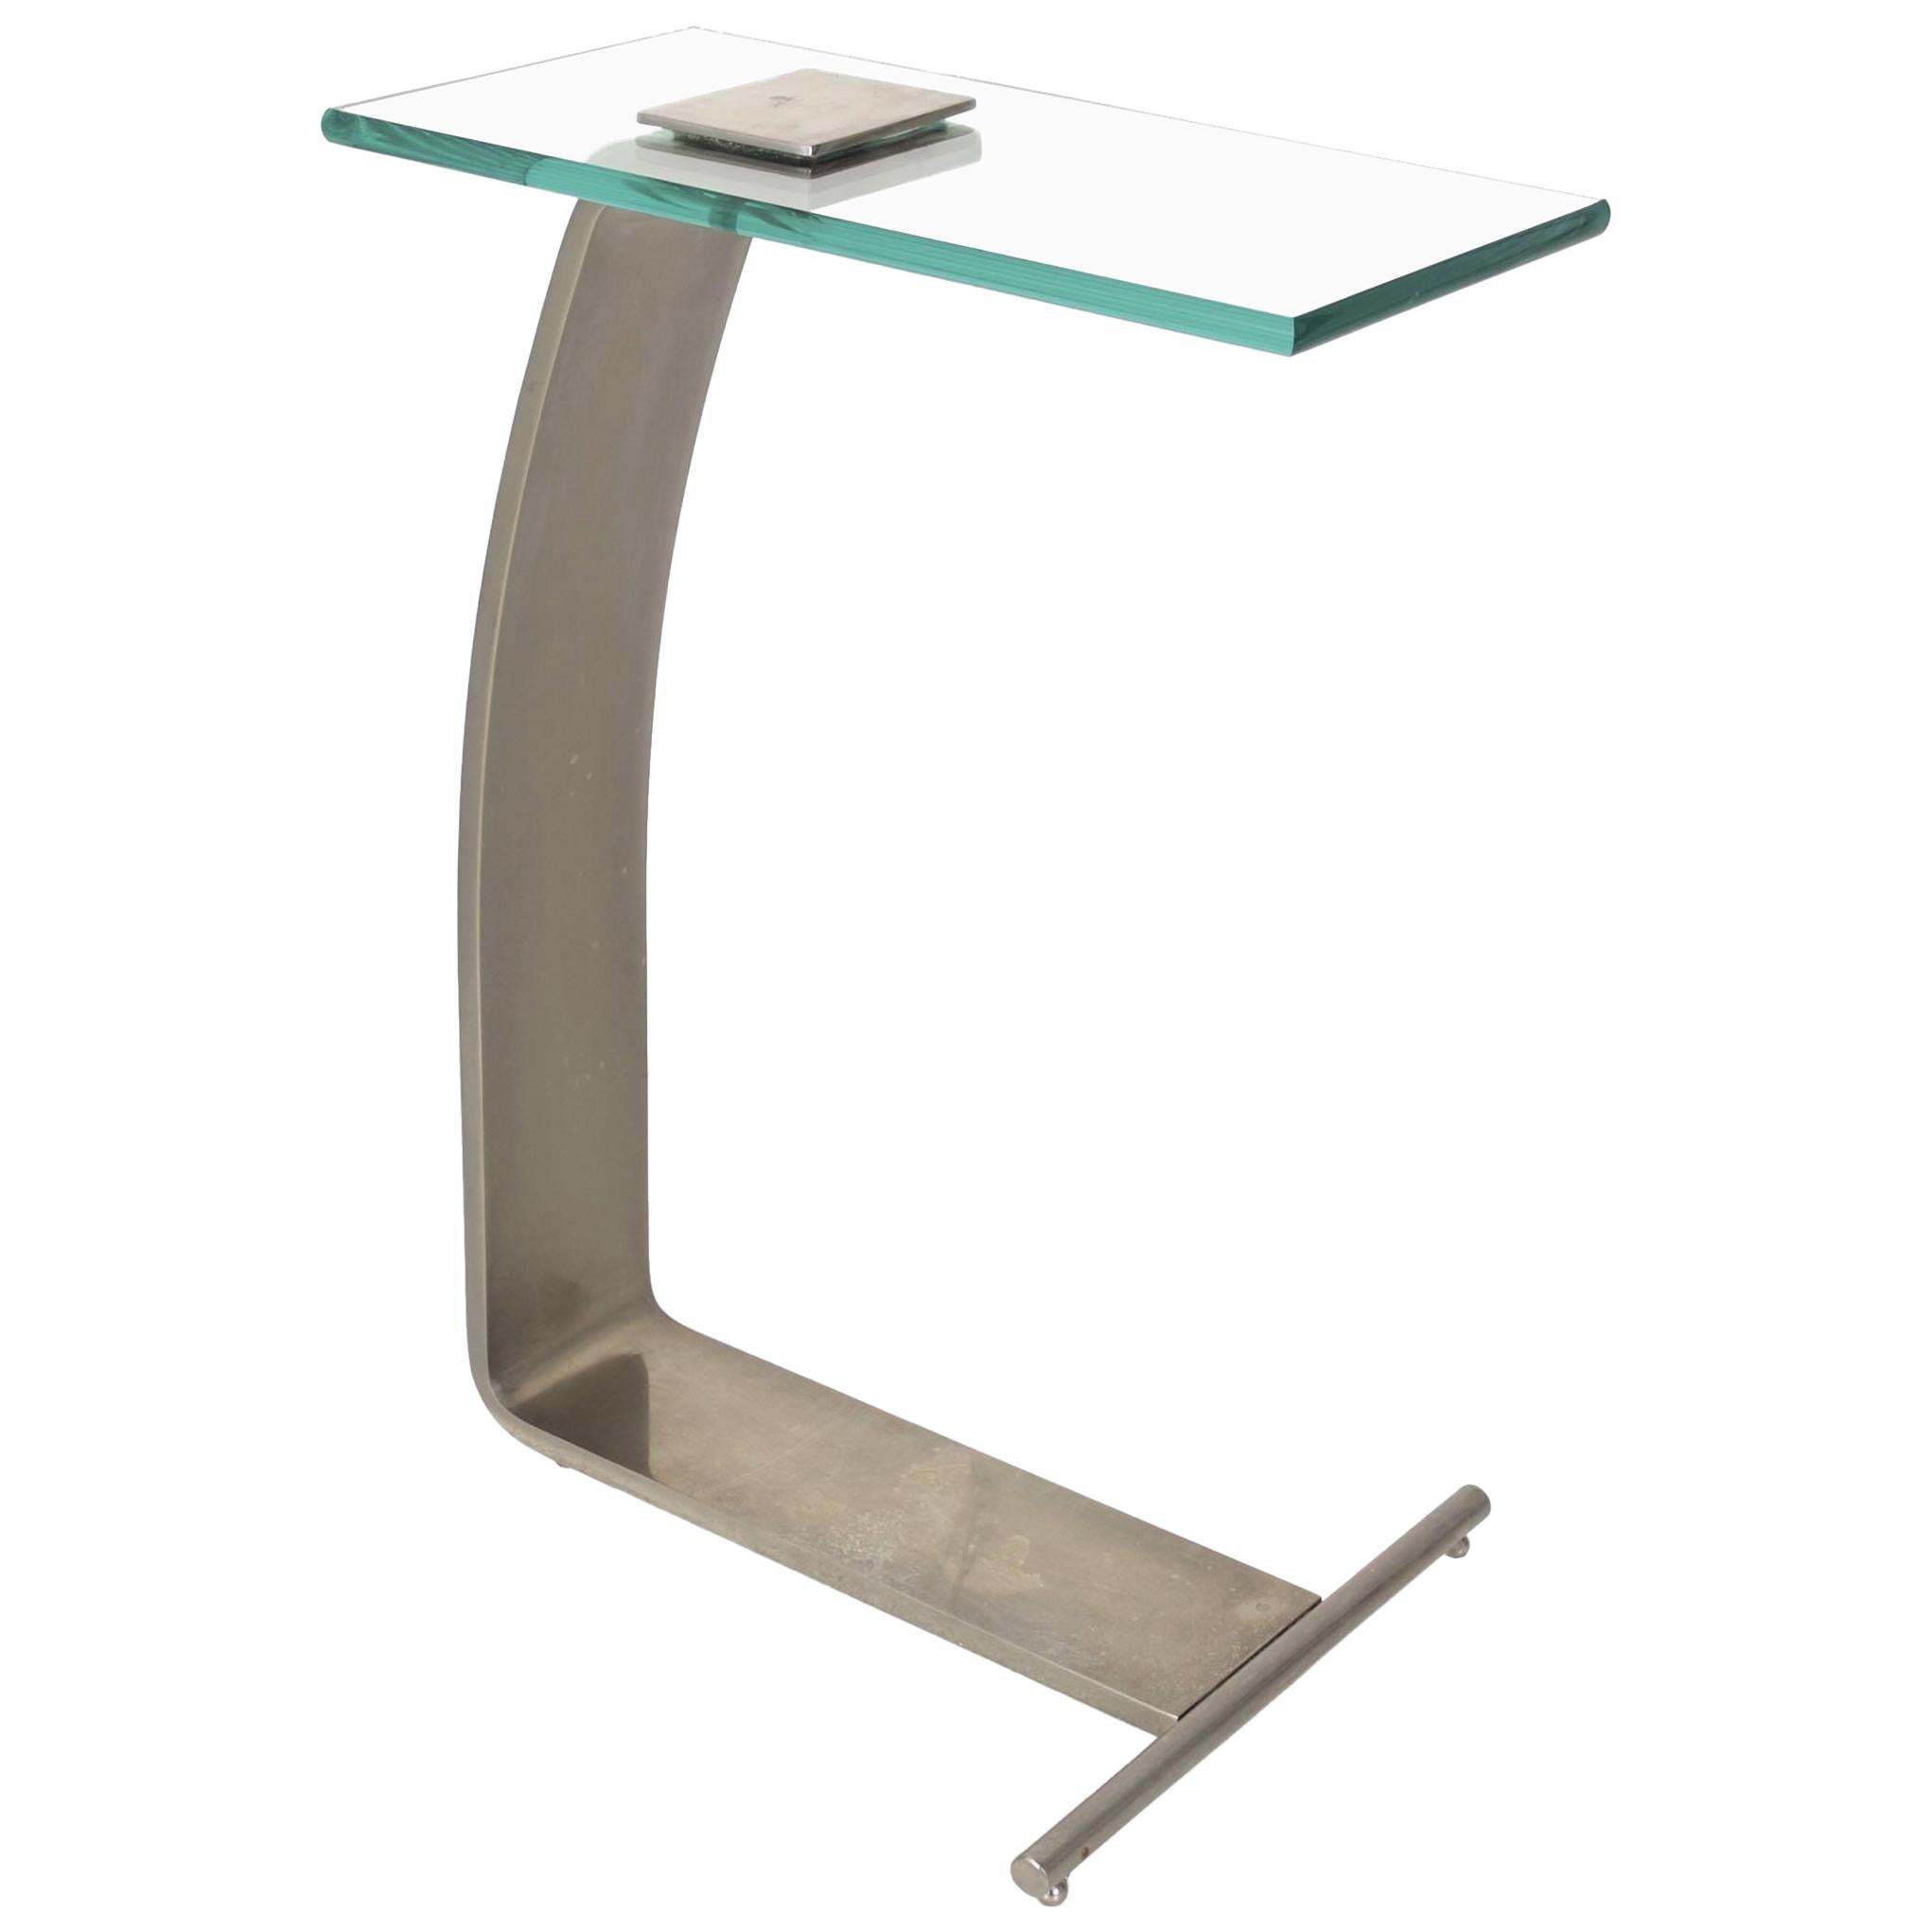 Modernist Steel and Glass Cantilever Drink Side Table by Marty Smith